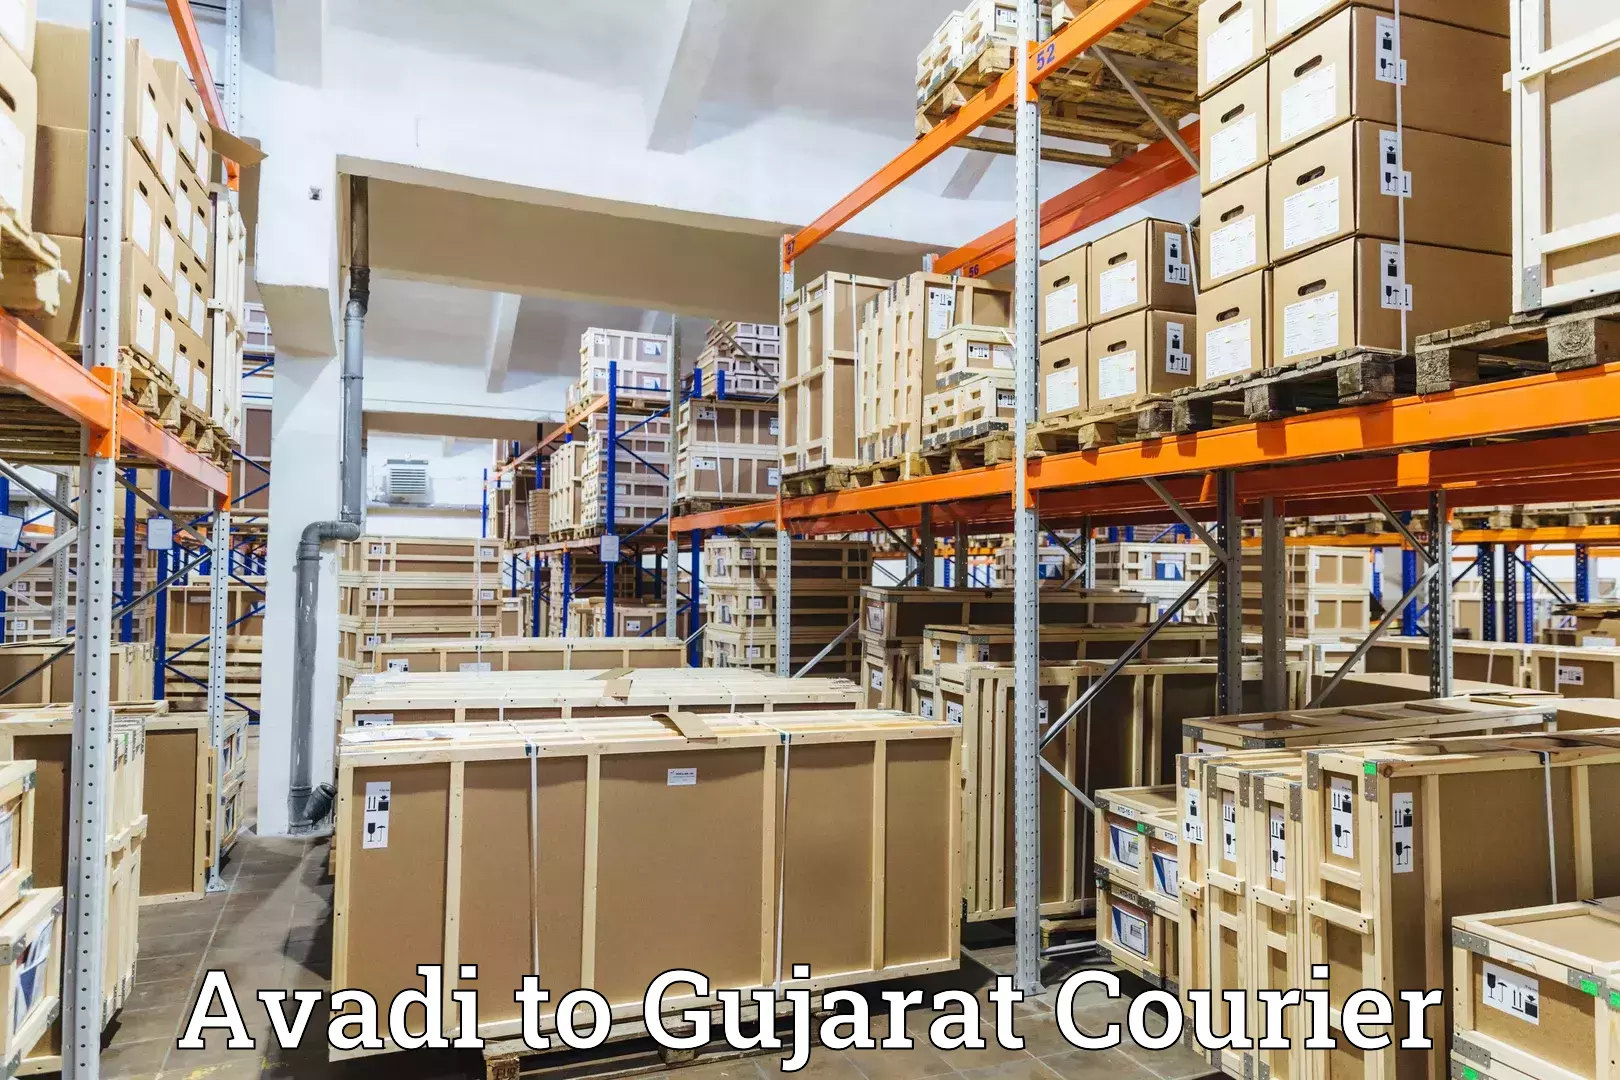 Courier service booking in Avadi to Veraval